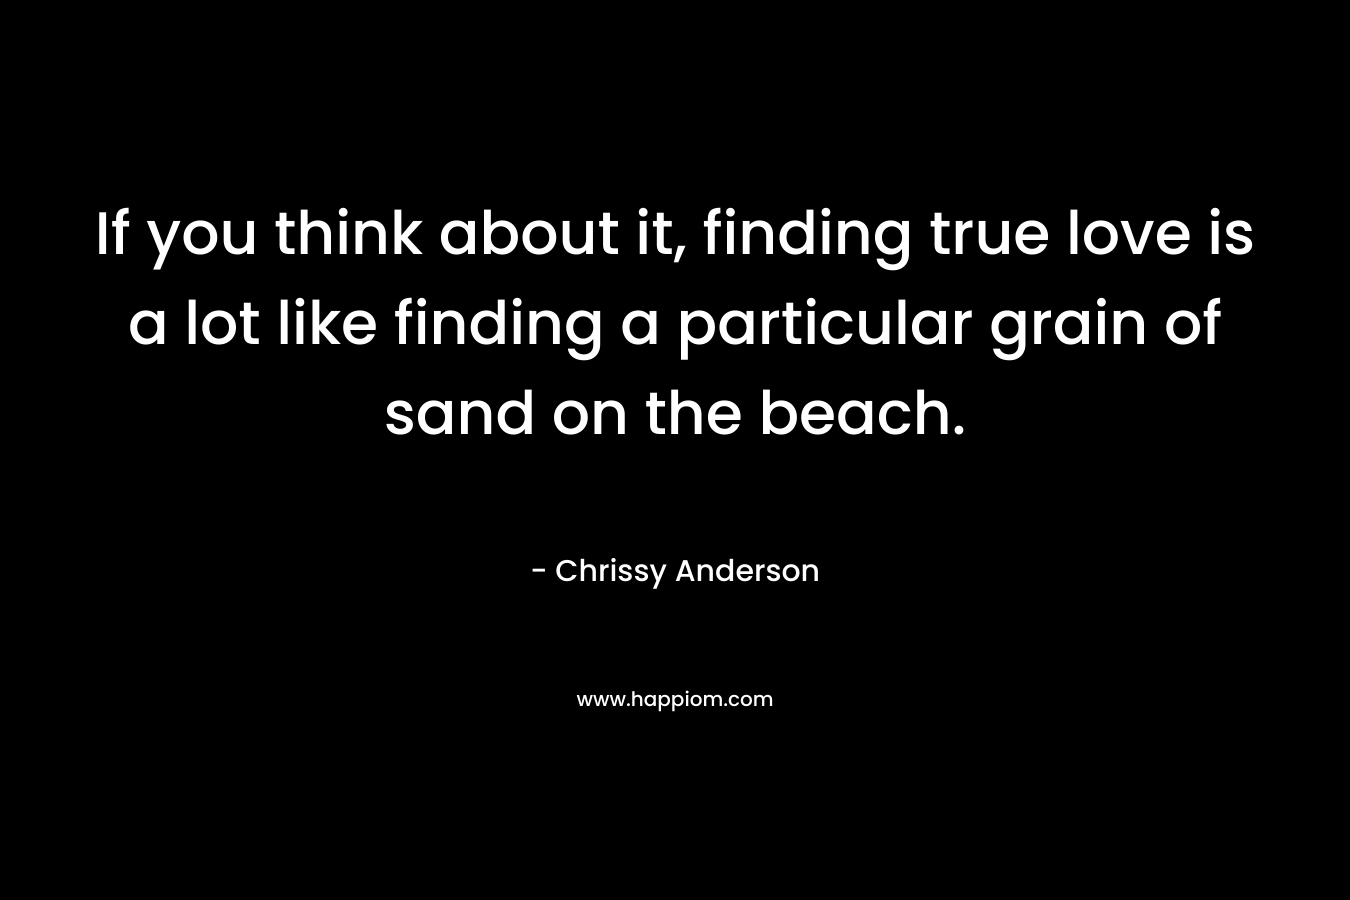 If you think about it, finding true love is a lot like finding a particular grain of sand on the beach.